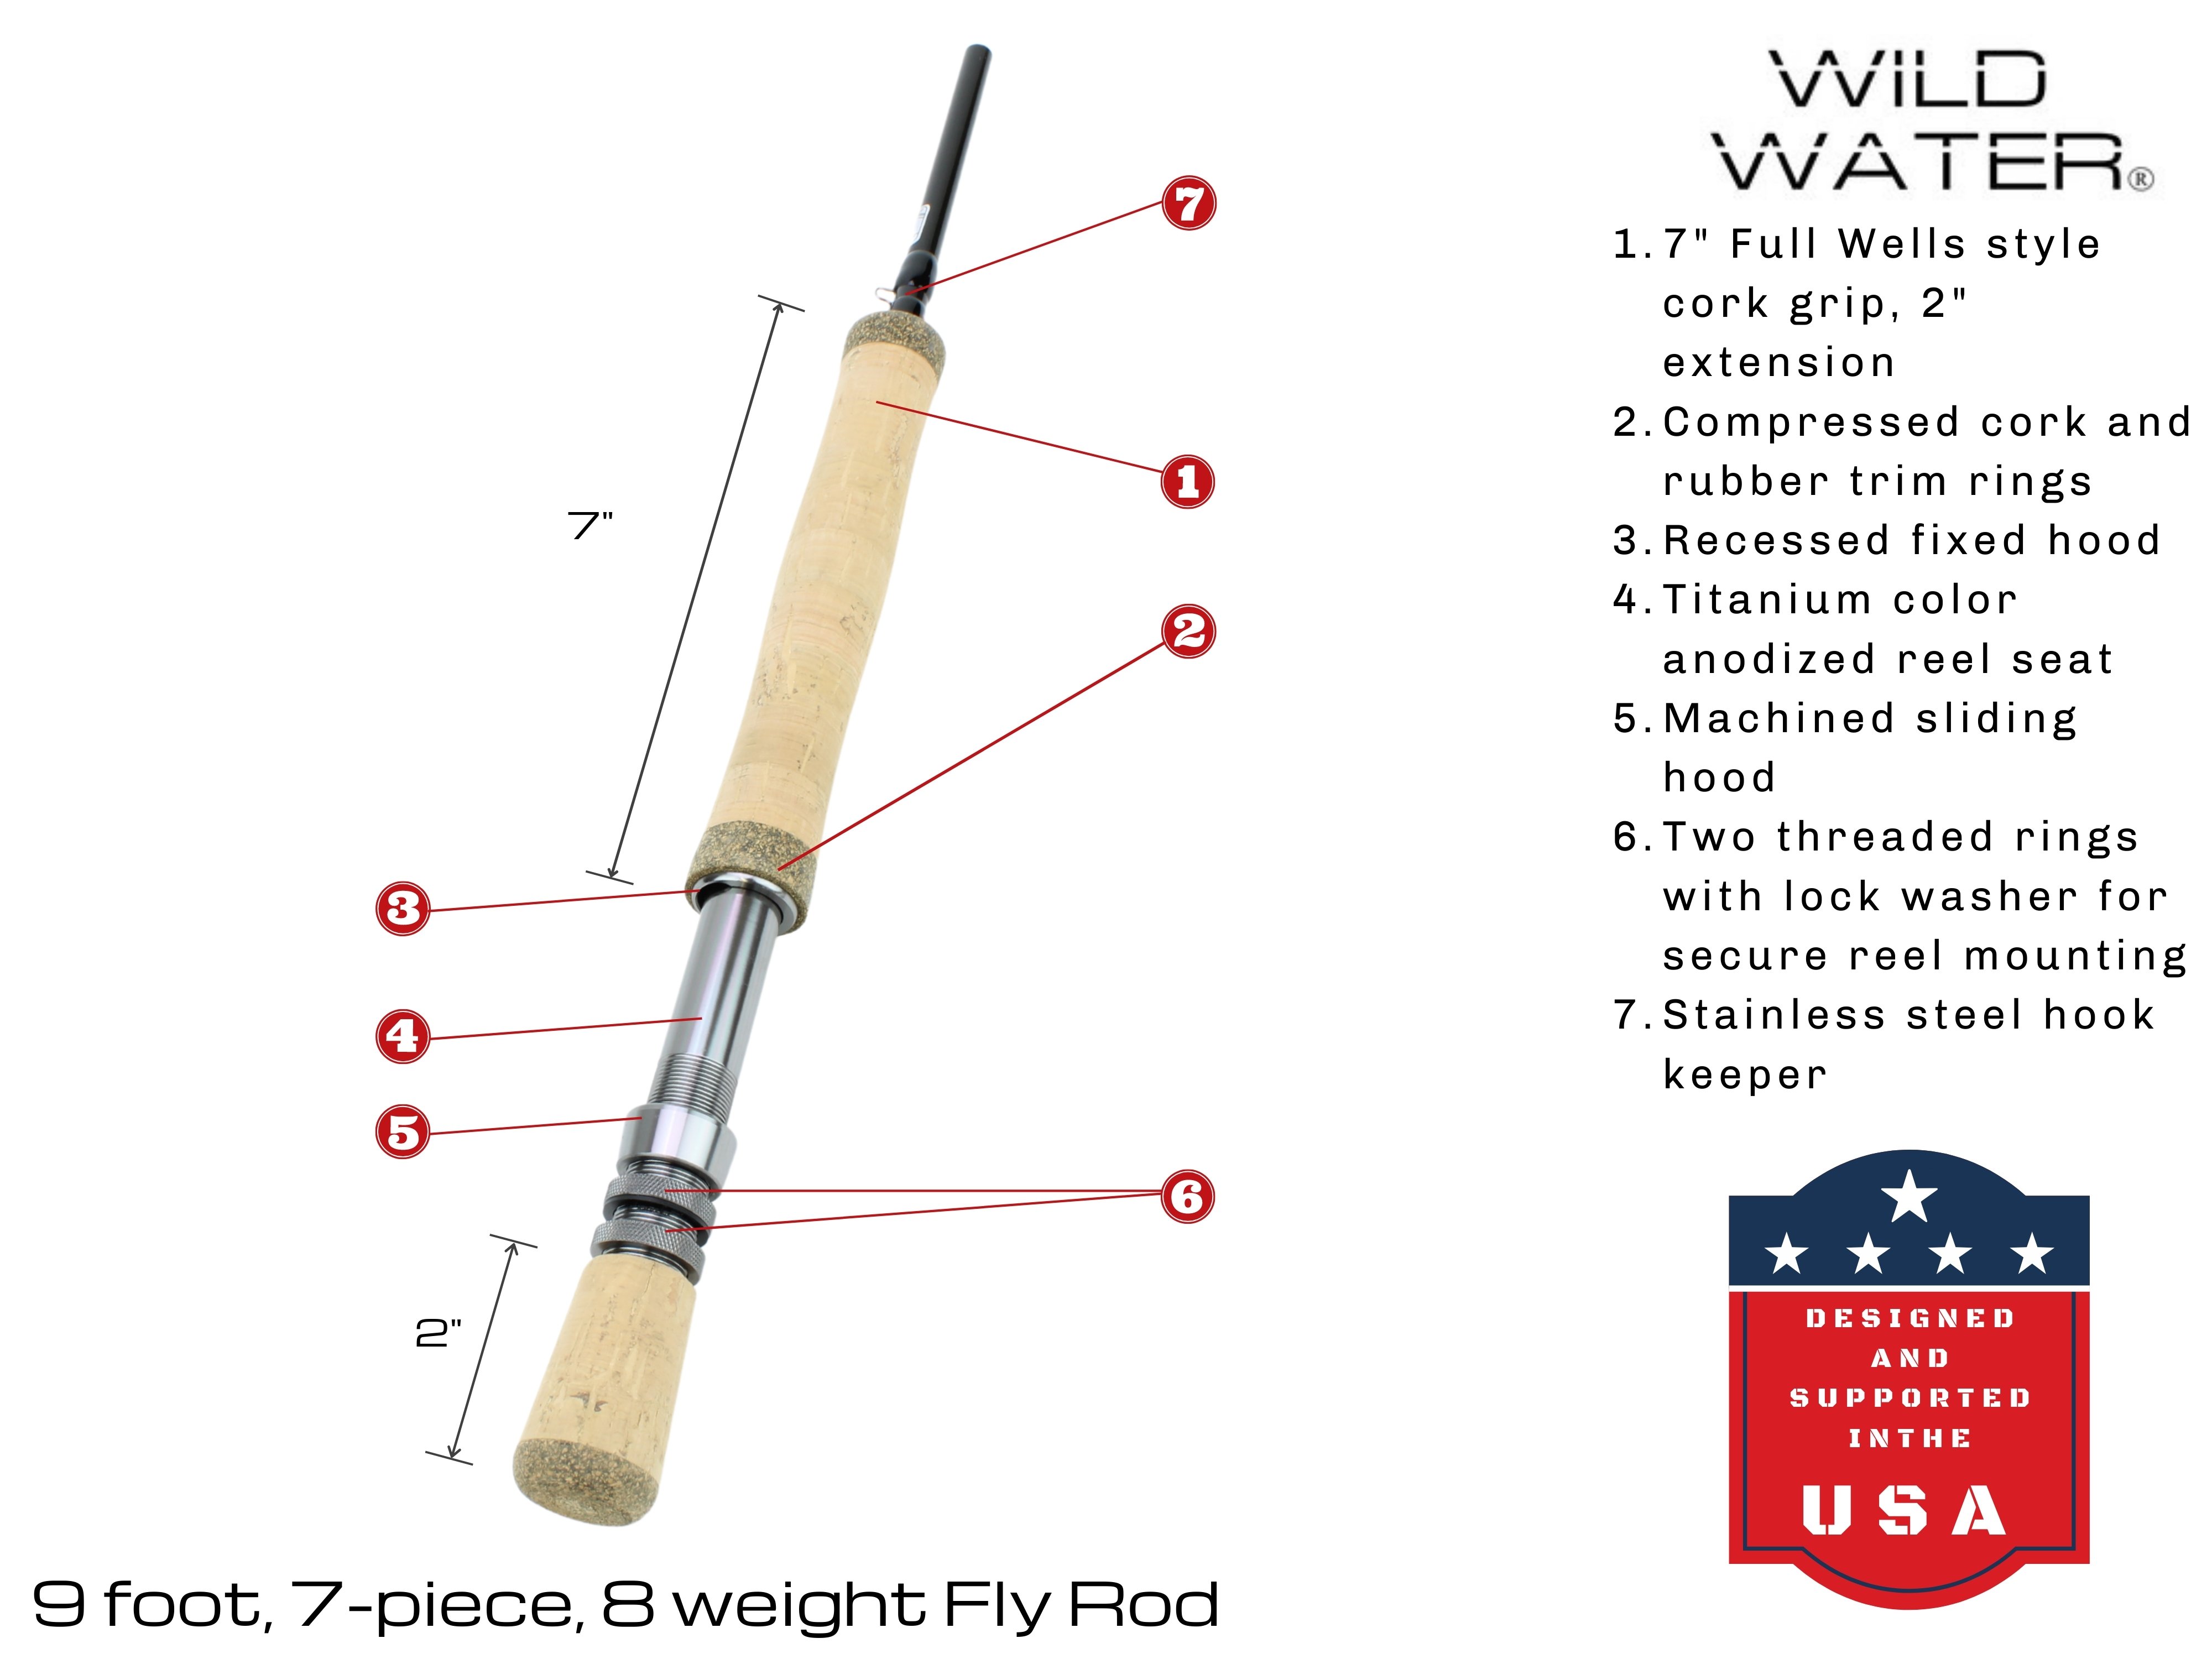 Wild Water Fly Fishing, 9 Foot, 8 Weight, 7 Piece Pack Rod and Reel, Deluxe Combo Kit, Freshwater Flies - image 3 of 6